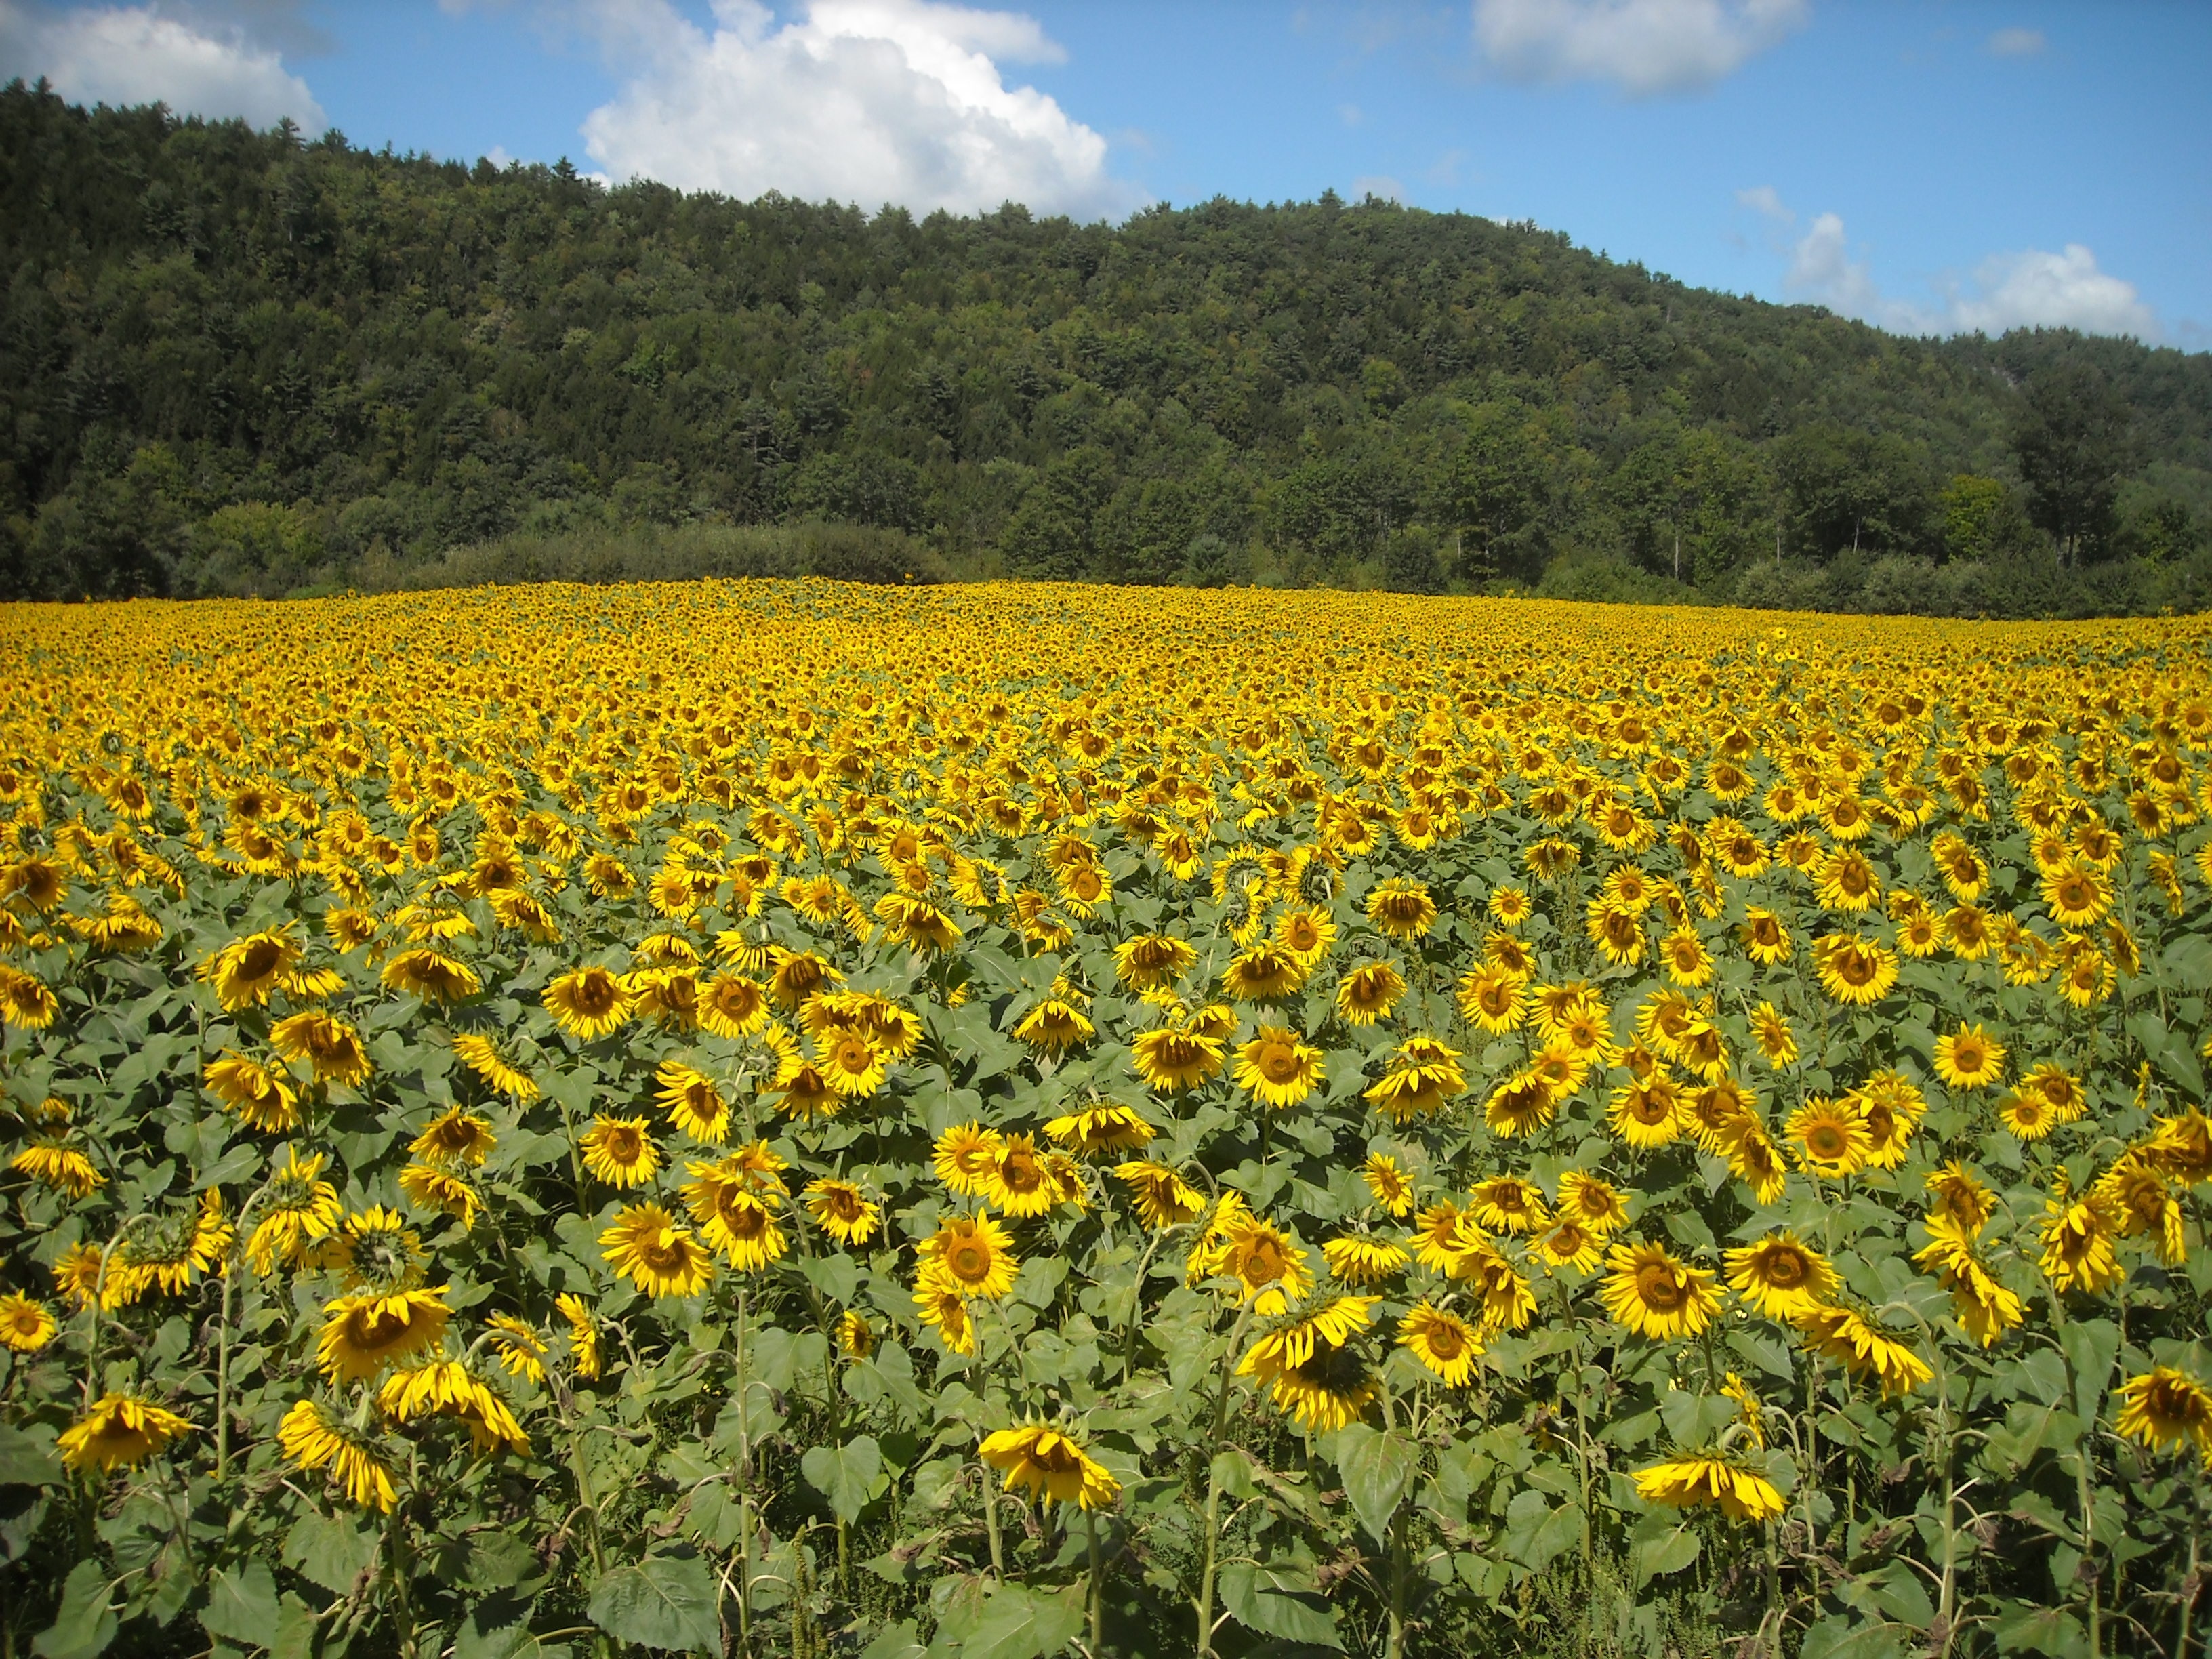 Vermont sunflowers to help provide biodiesel fuel